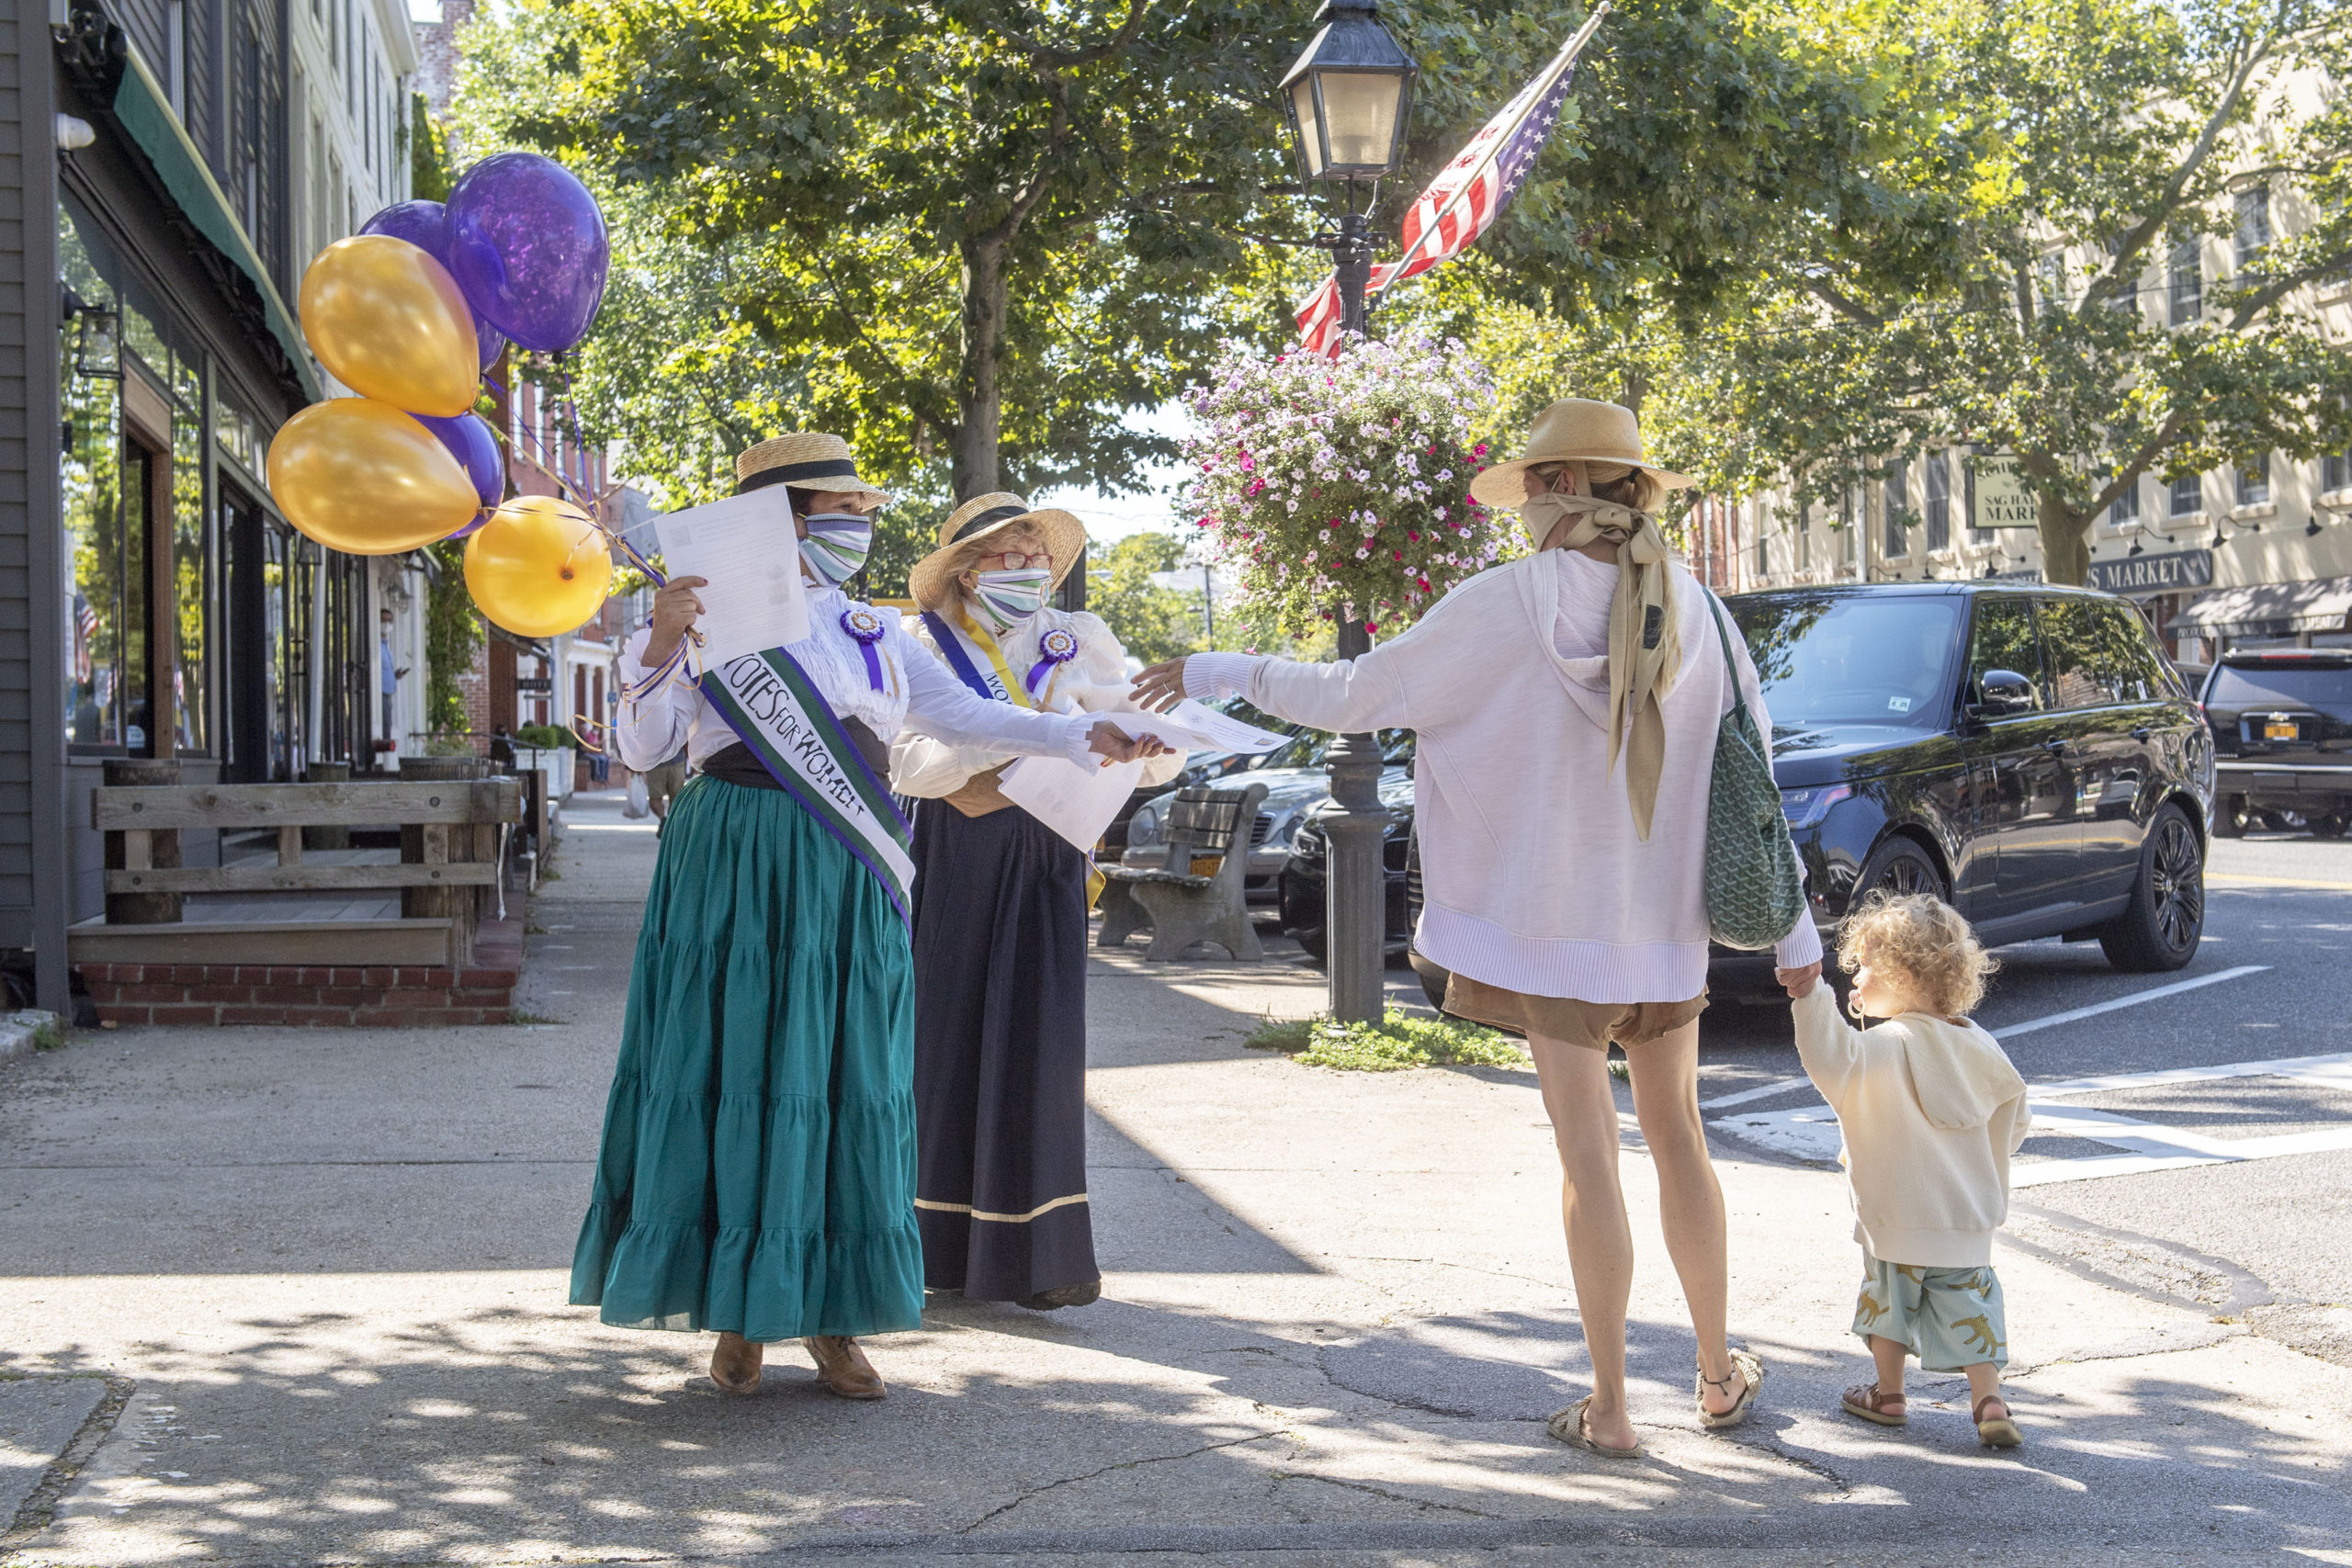 To honor the 100th anniversary of the 19th Amendment and women's right to vote, WLNG radio personality Bonnie Grice and Christ Episcopal Church Pastor Karen Campbell, in conjunction with the Sag Harbor Historical Society, wear period outfits and hand out fliers on Main Street in Sag Harbor on August 26.      
MICHAEL HELLER